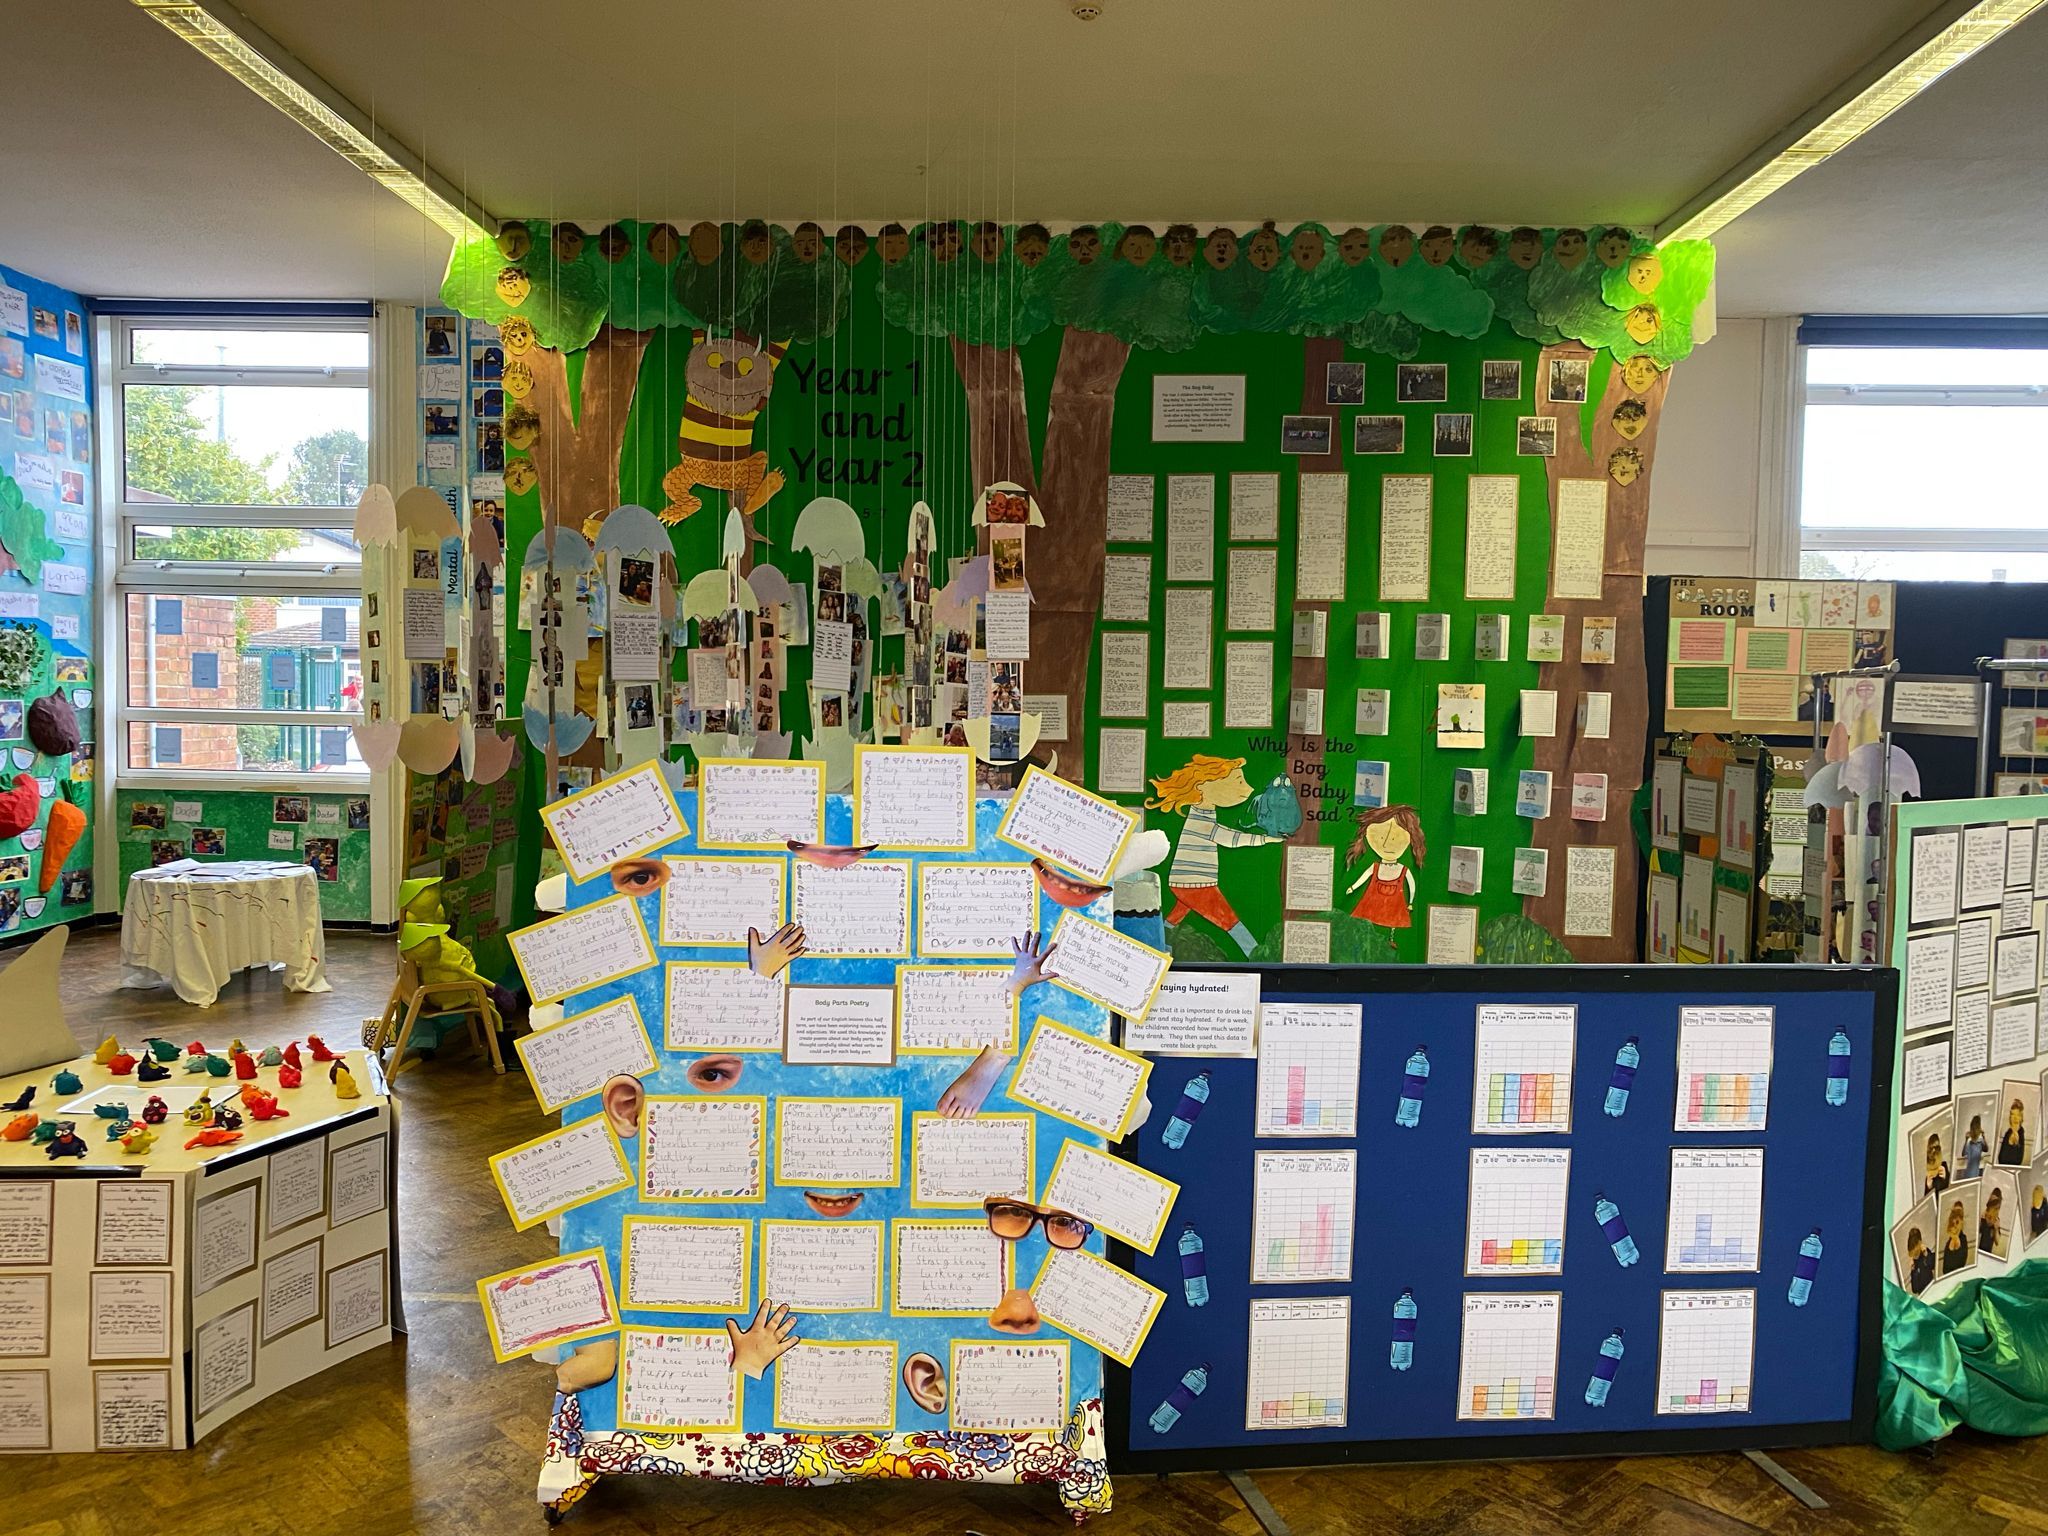 Tarvin Primary School pupils wowed parents and visitors with a spectacular showcase.